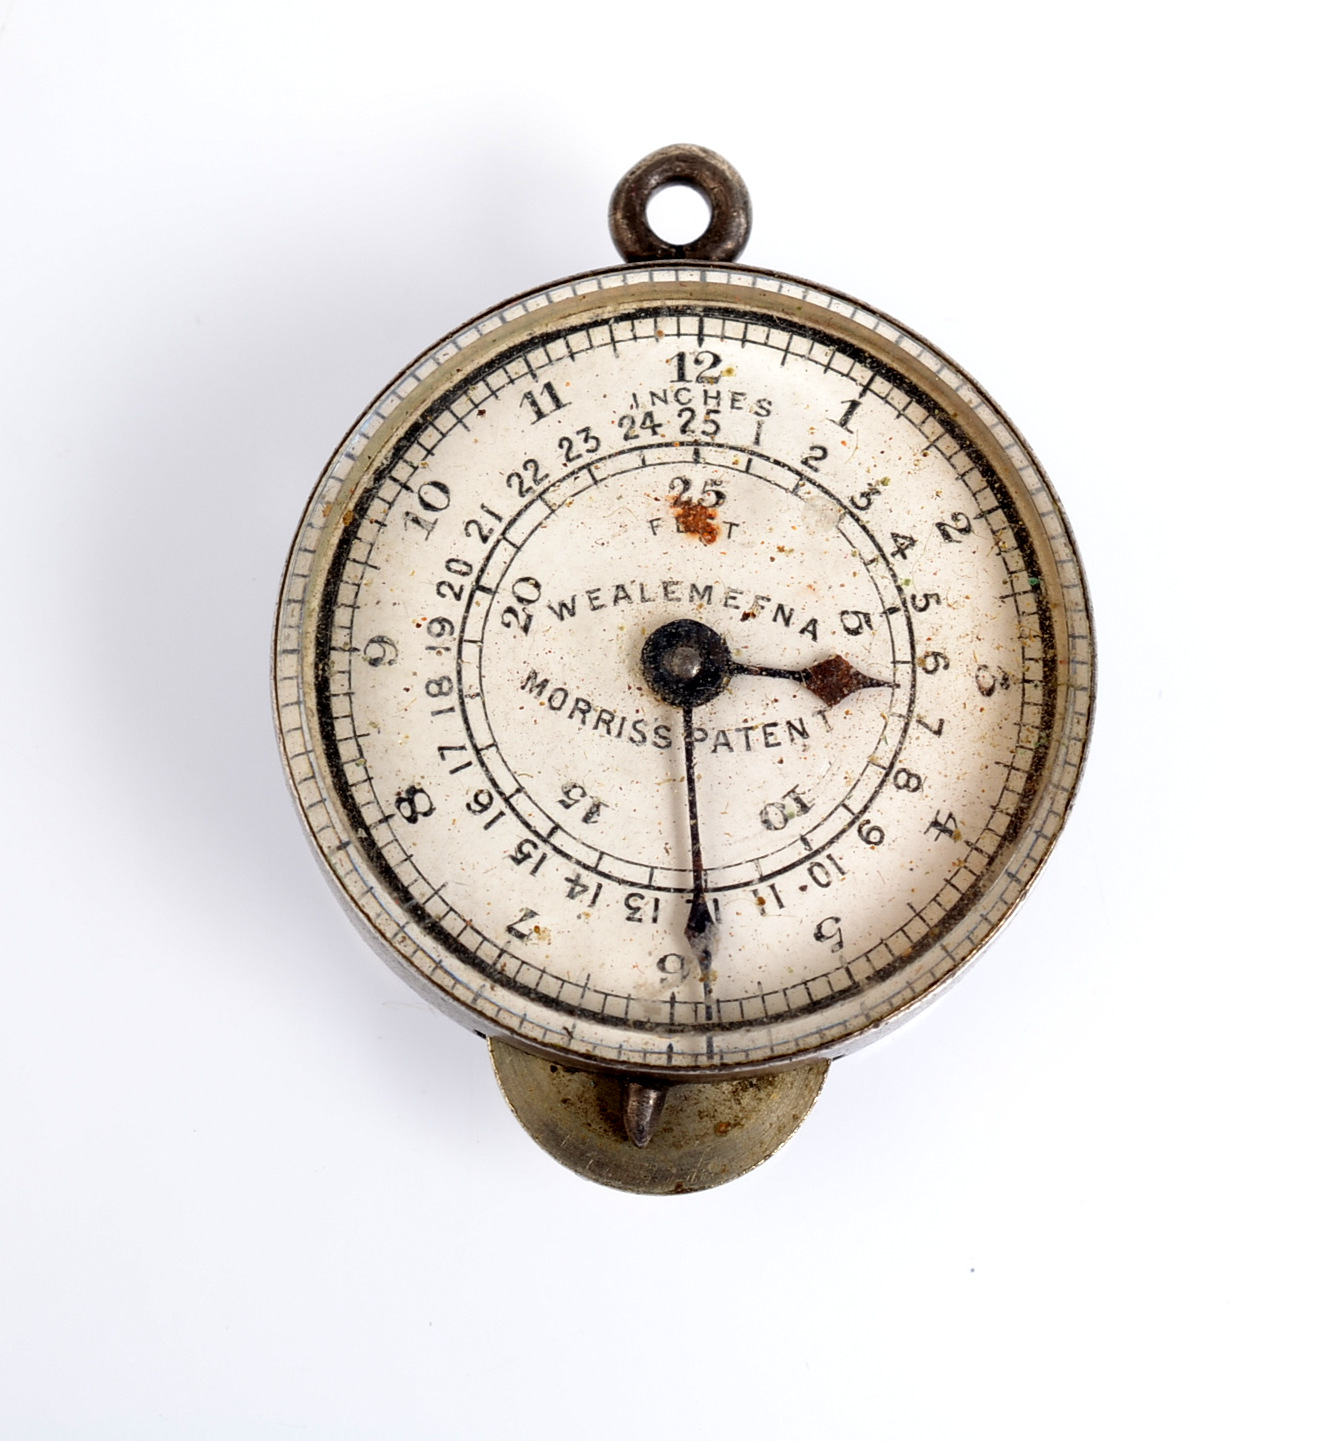 A late Victorian Morris's Patent Wealemefna map measuring instrument, in unhallmarked silver case,